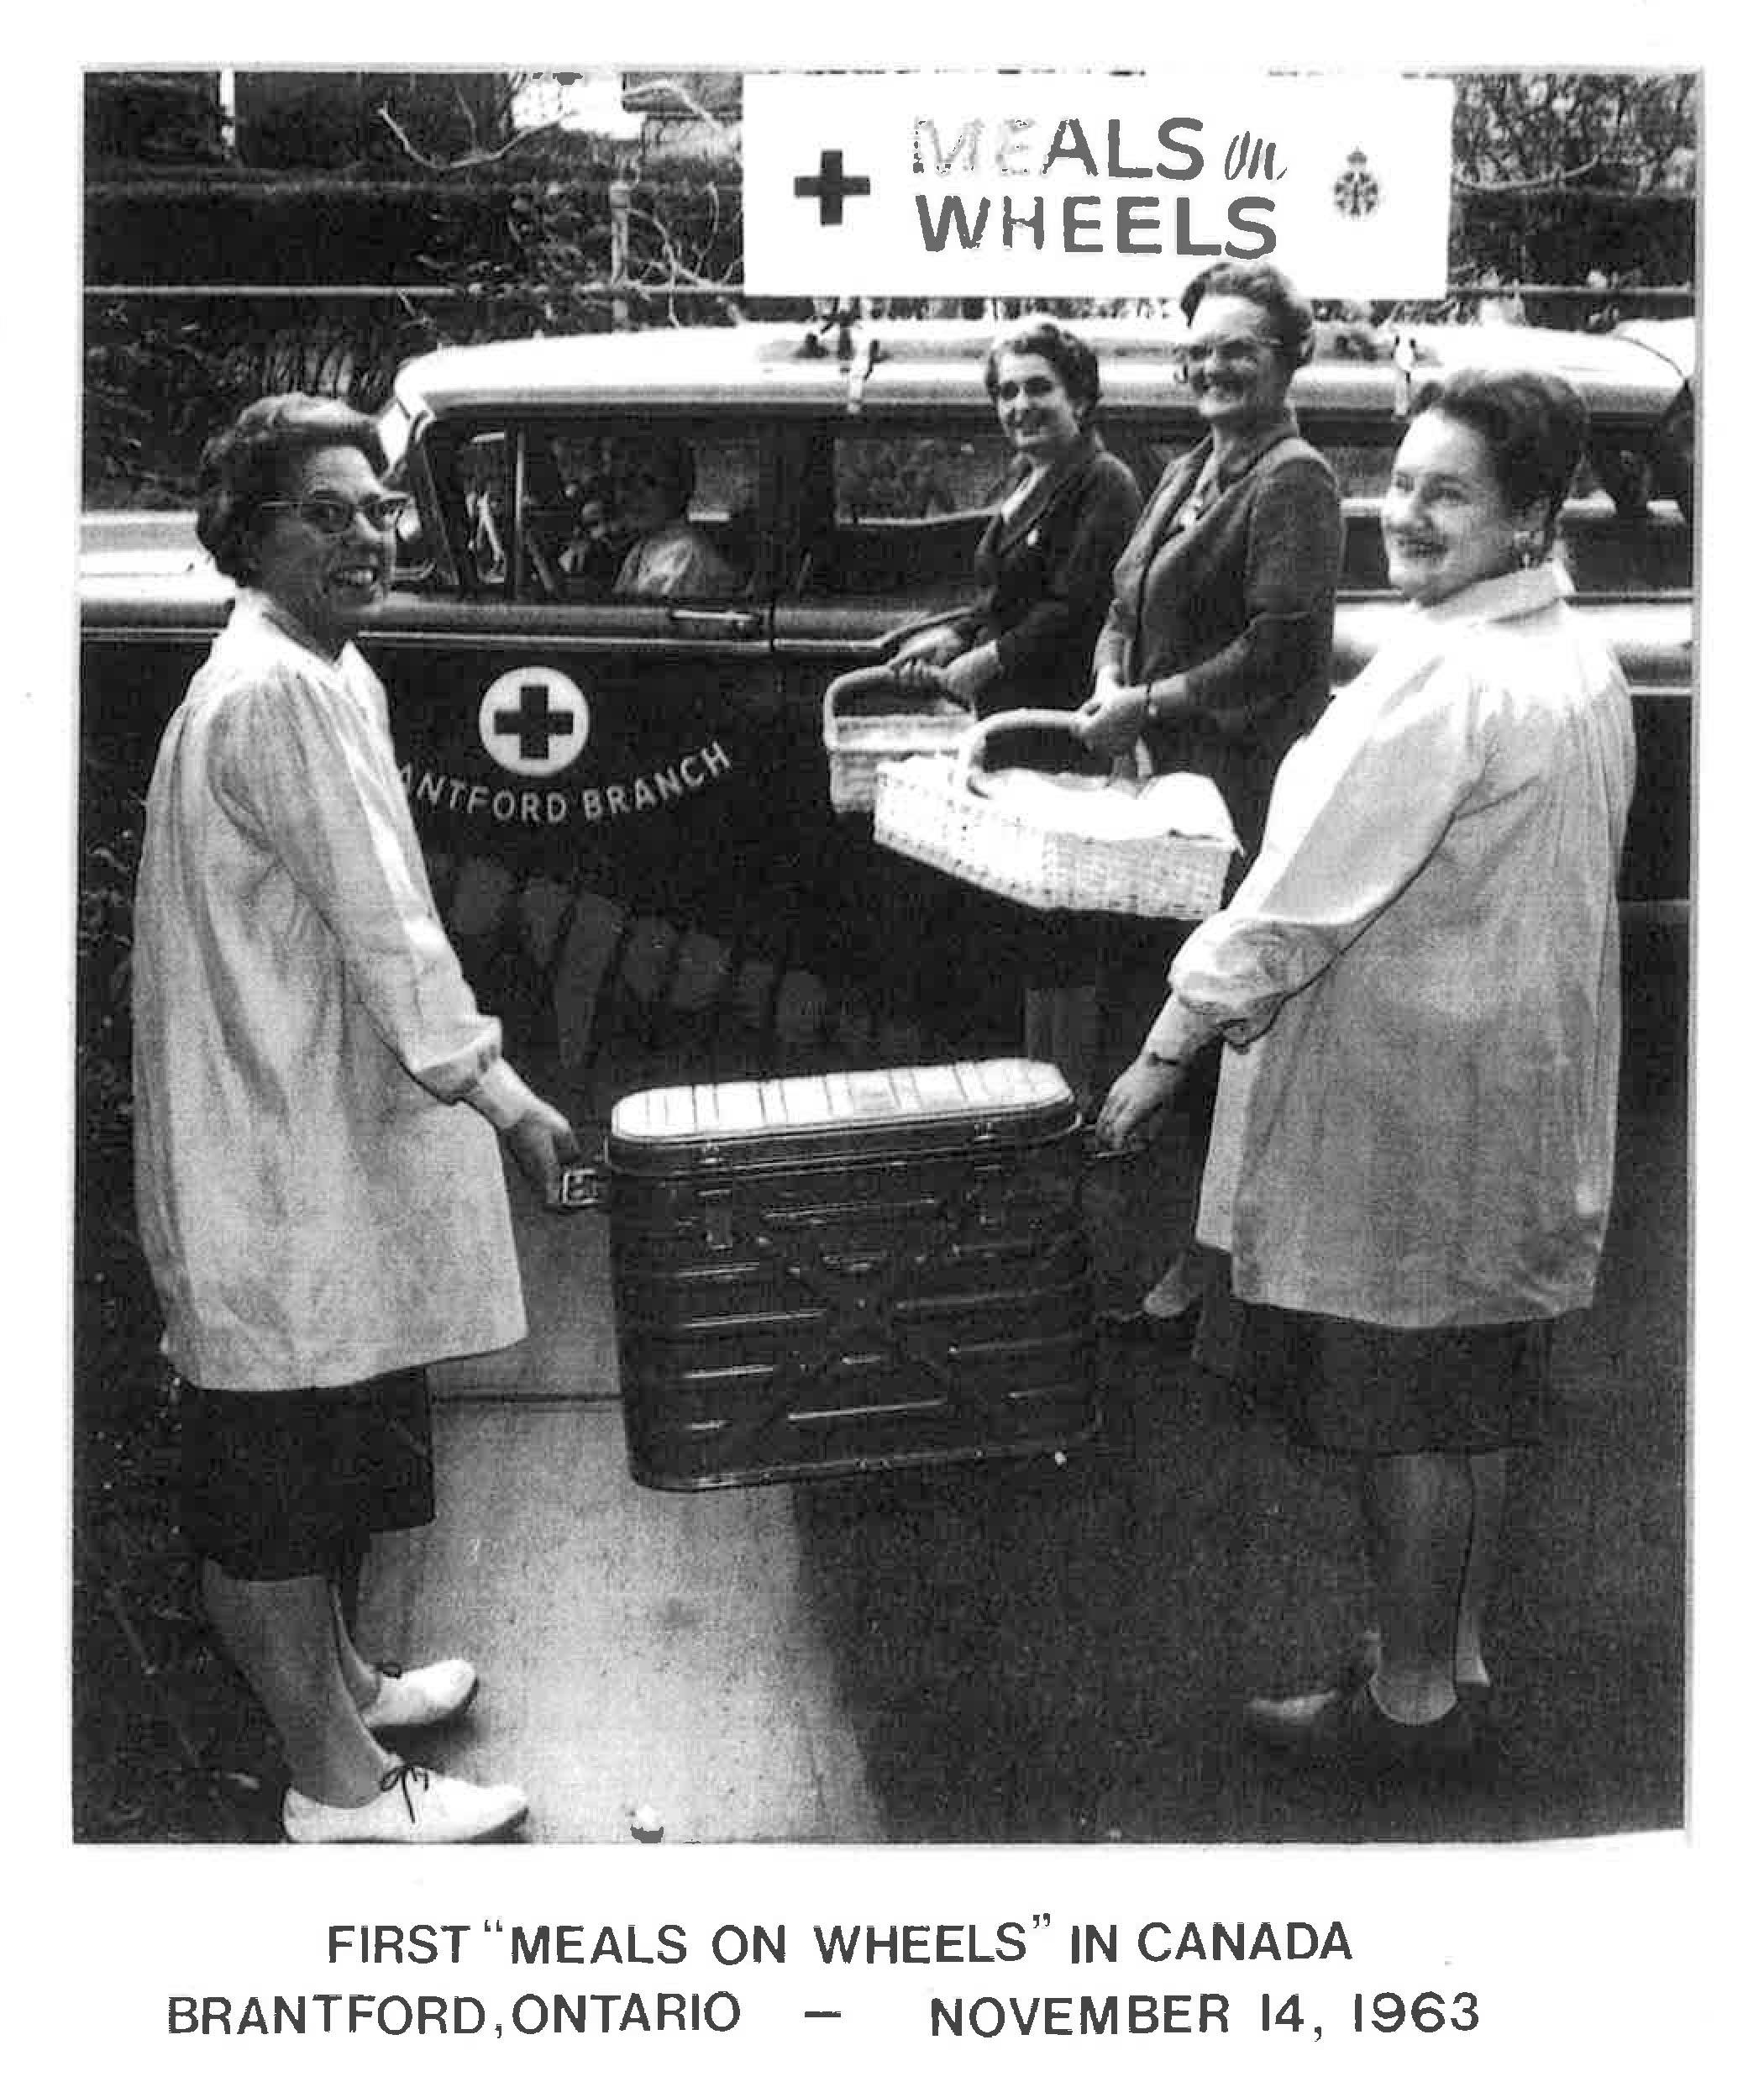 Meals on Wheels archives